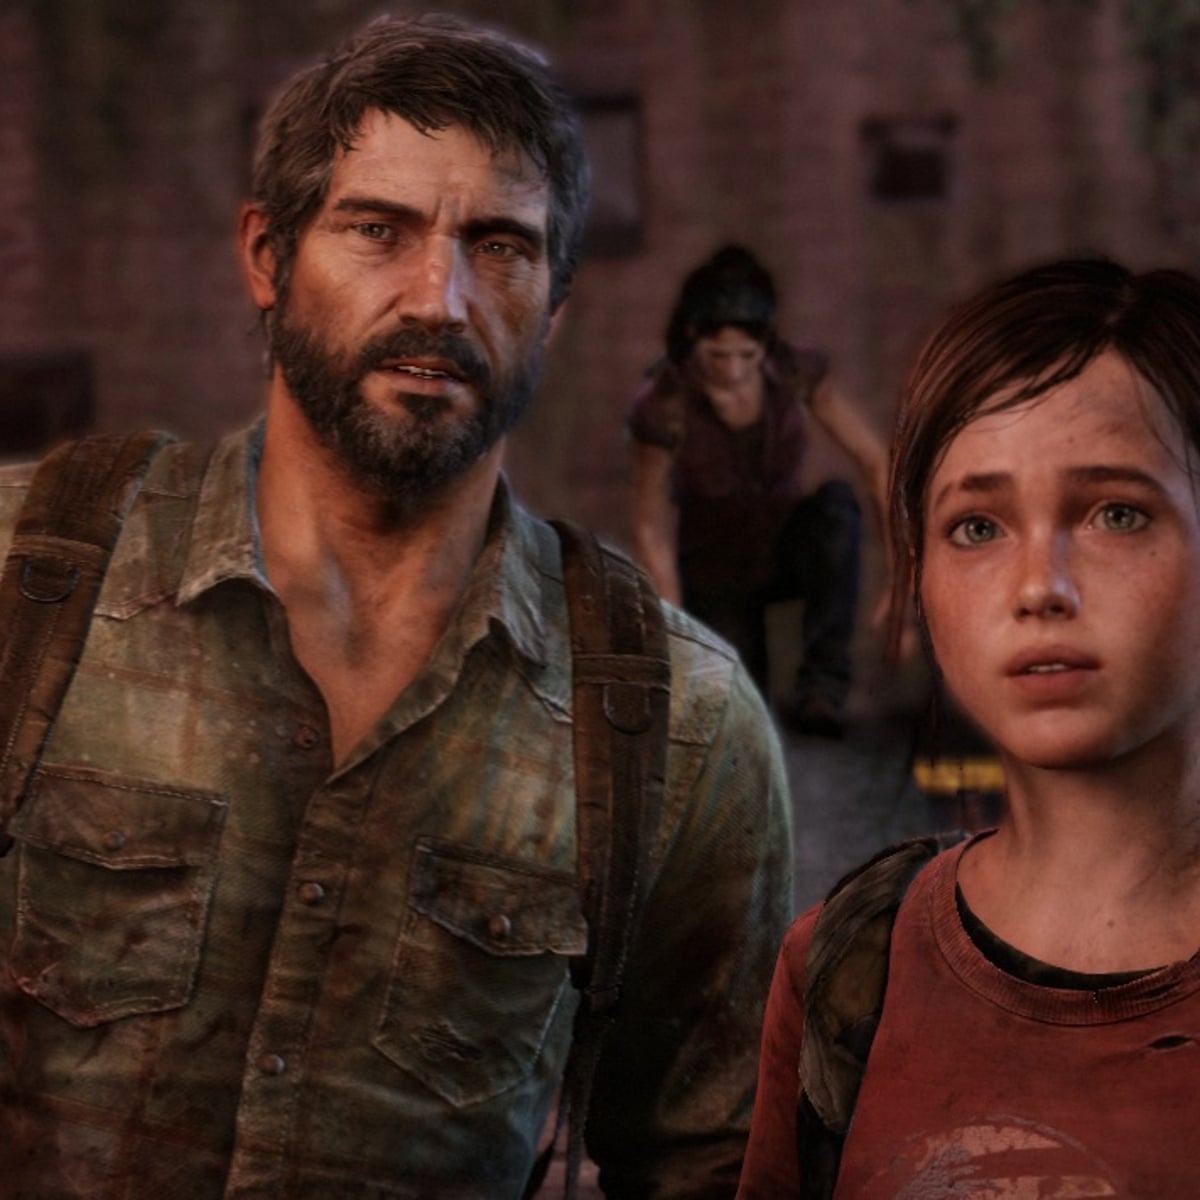 Was Joel Right At The End Of The Last Of Us Part 1?